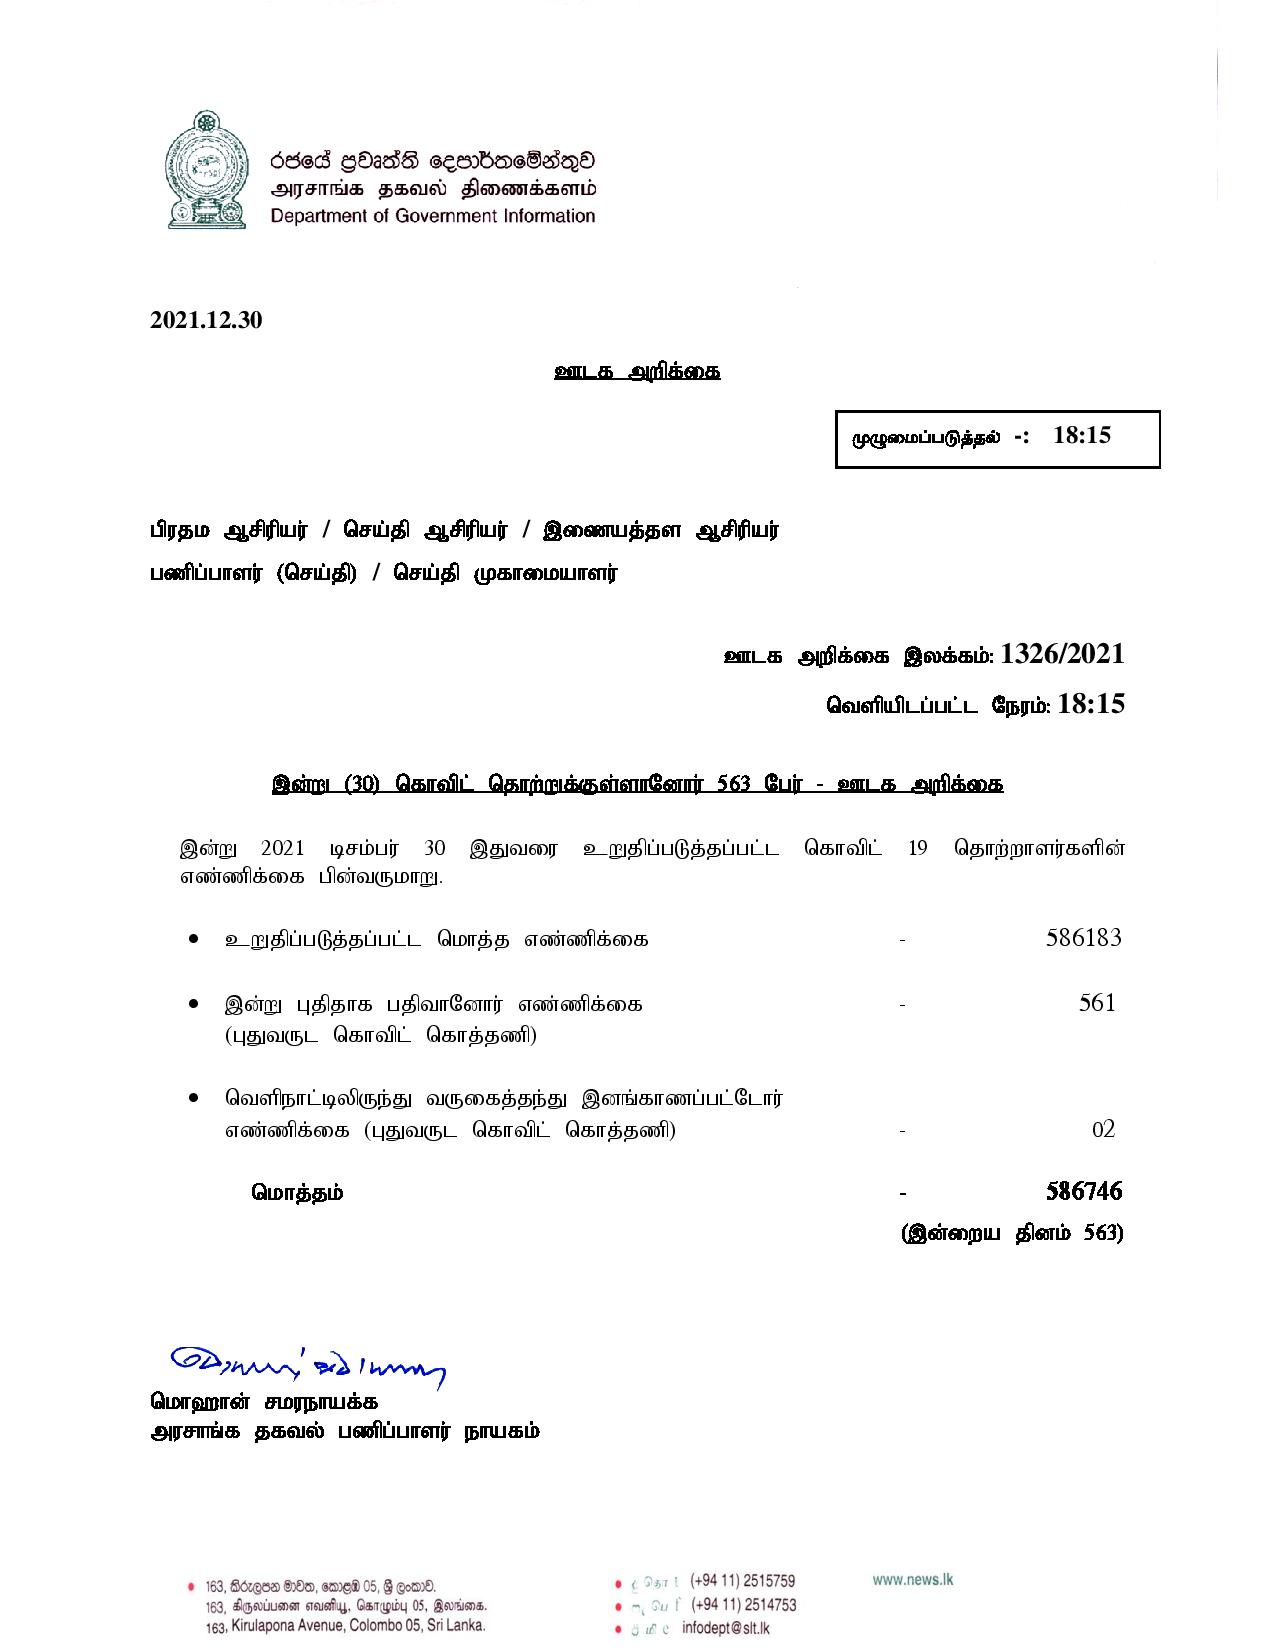 Press Release 1326 Tamil page 001